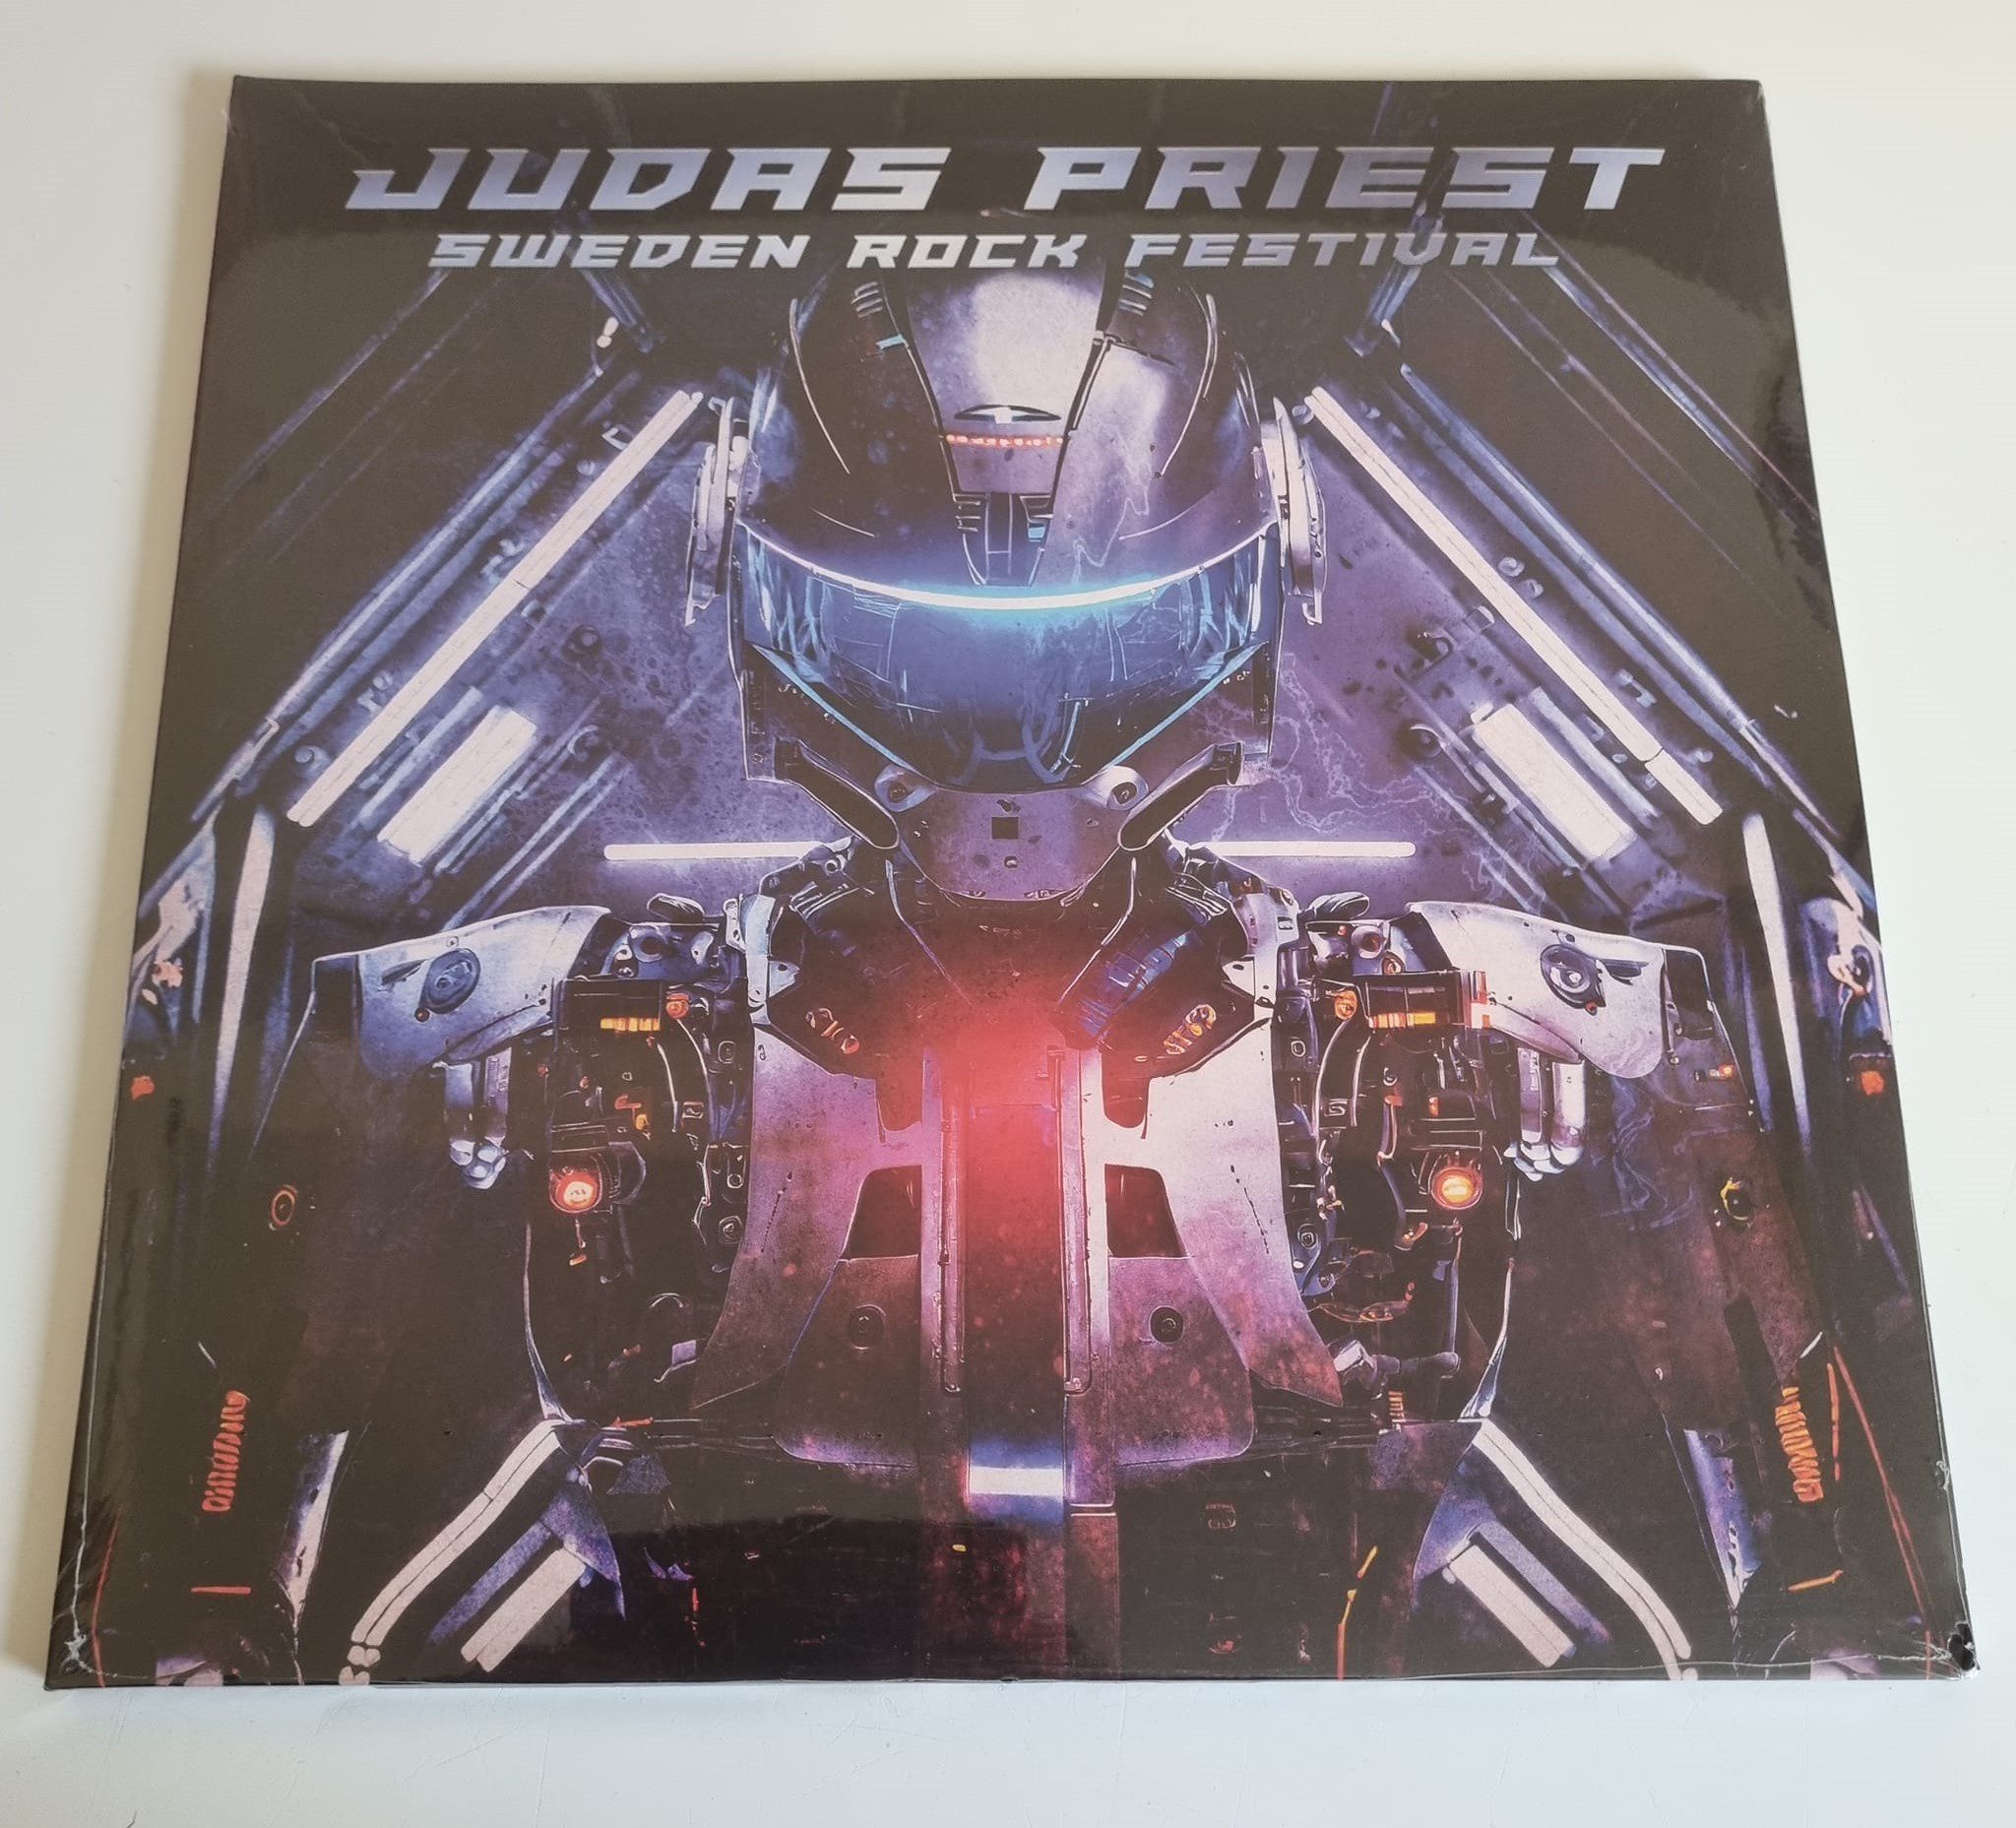 Buy this rare Judas Priest record by clicking here